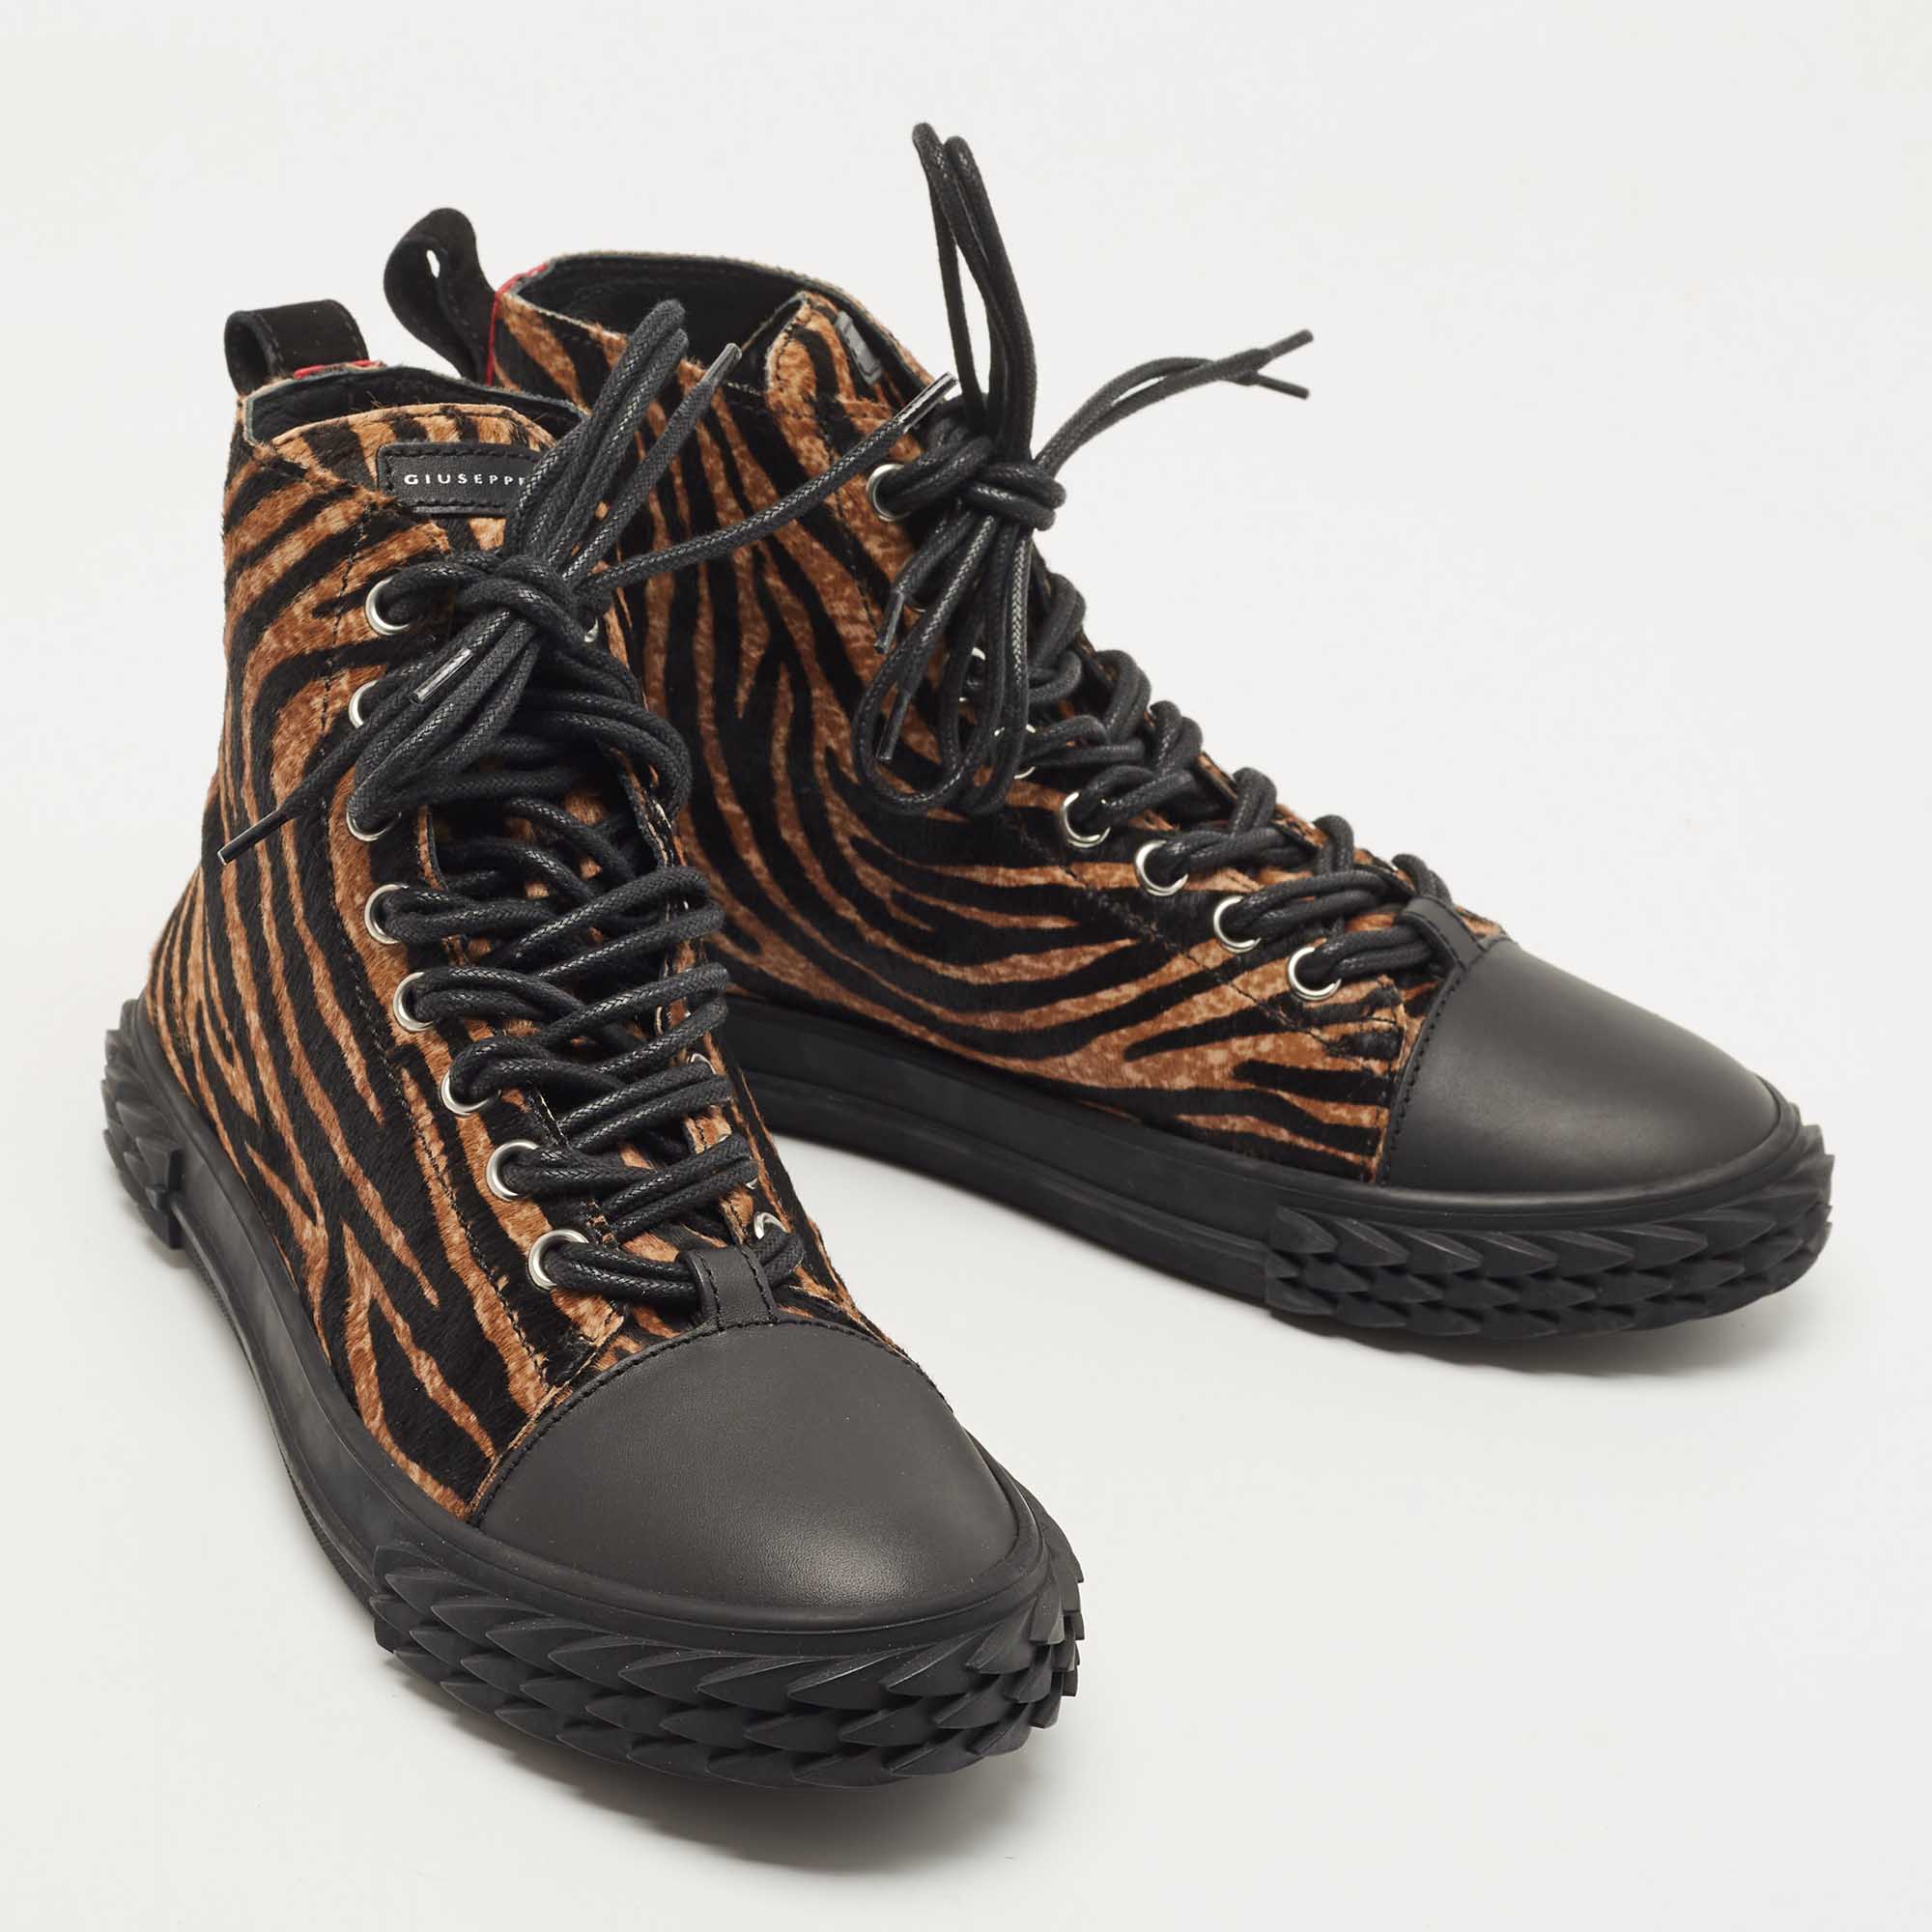 Giuseppe Zanotti Black/Brown Calf Hair And Rubber High Top Sneakers Size 43